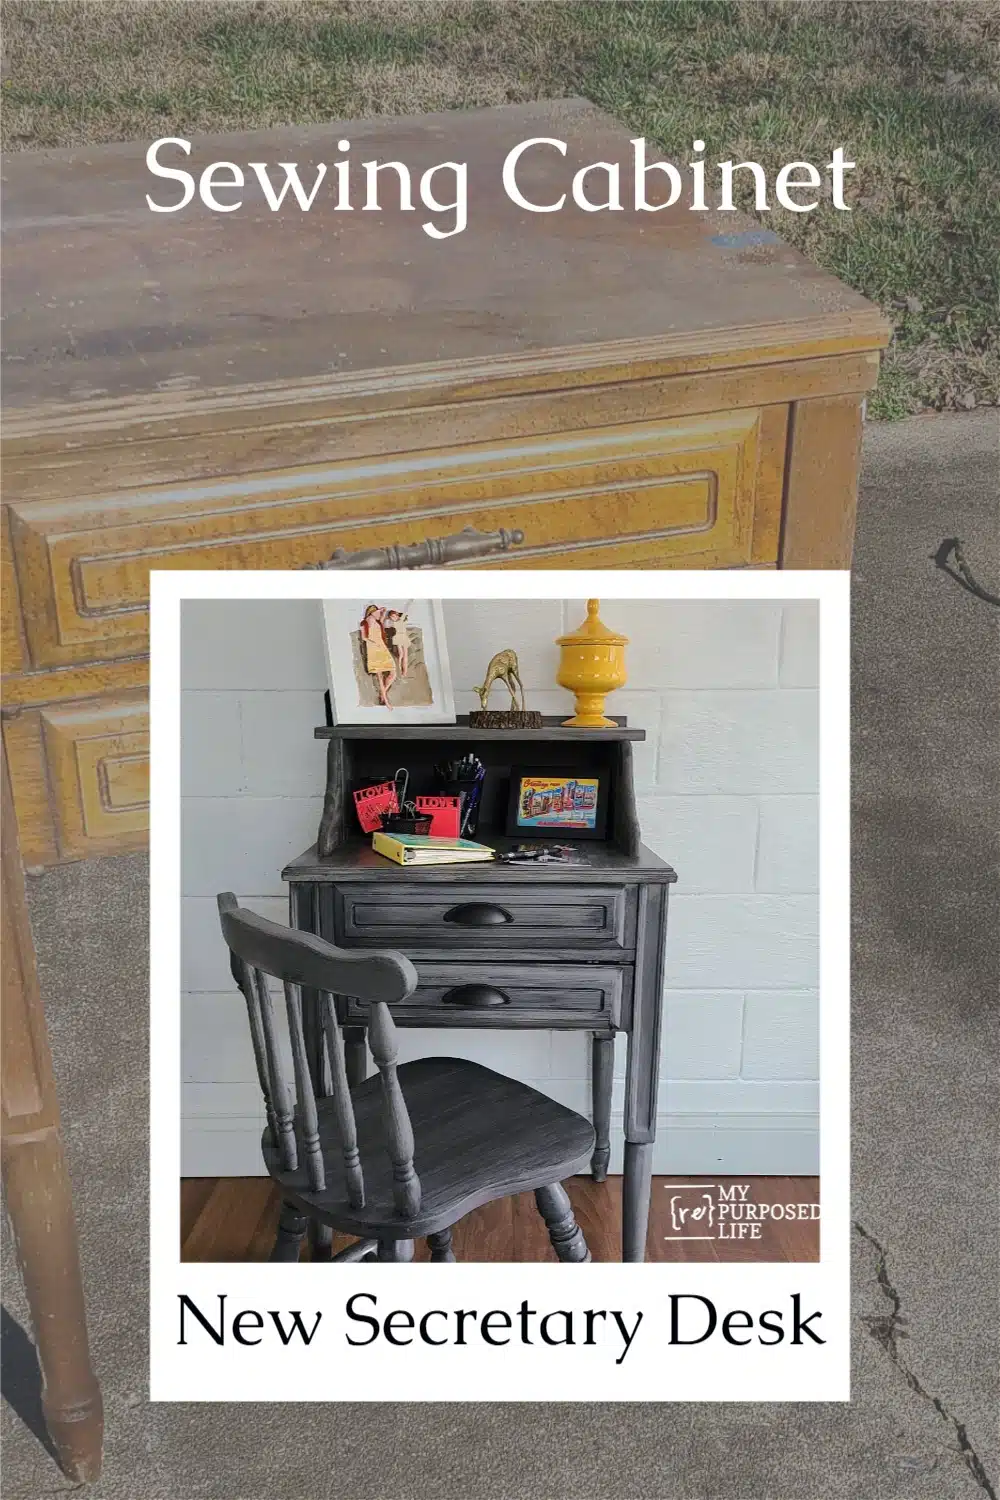 Step by step directions on how to make a secretary desk from an unwanted sewing cabinet. Perfect for laptop, or bill paying center. Tips for building and painting. #MyRepurposedLife #repurposed #upcycle #sewingcabinet #secretary via @repurposedlife  via @repurposedlife